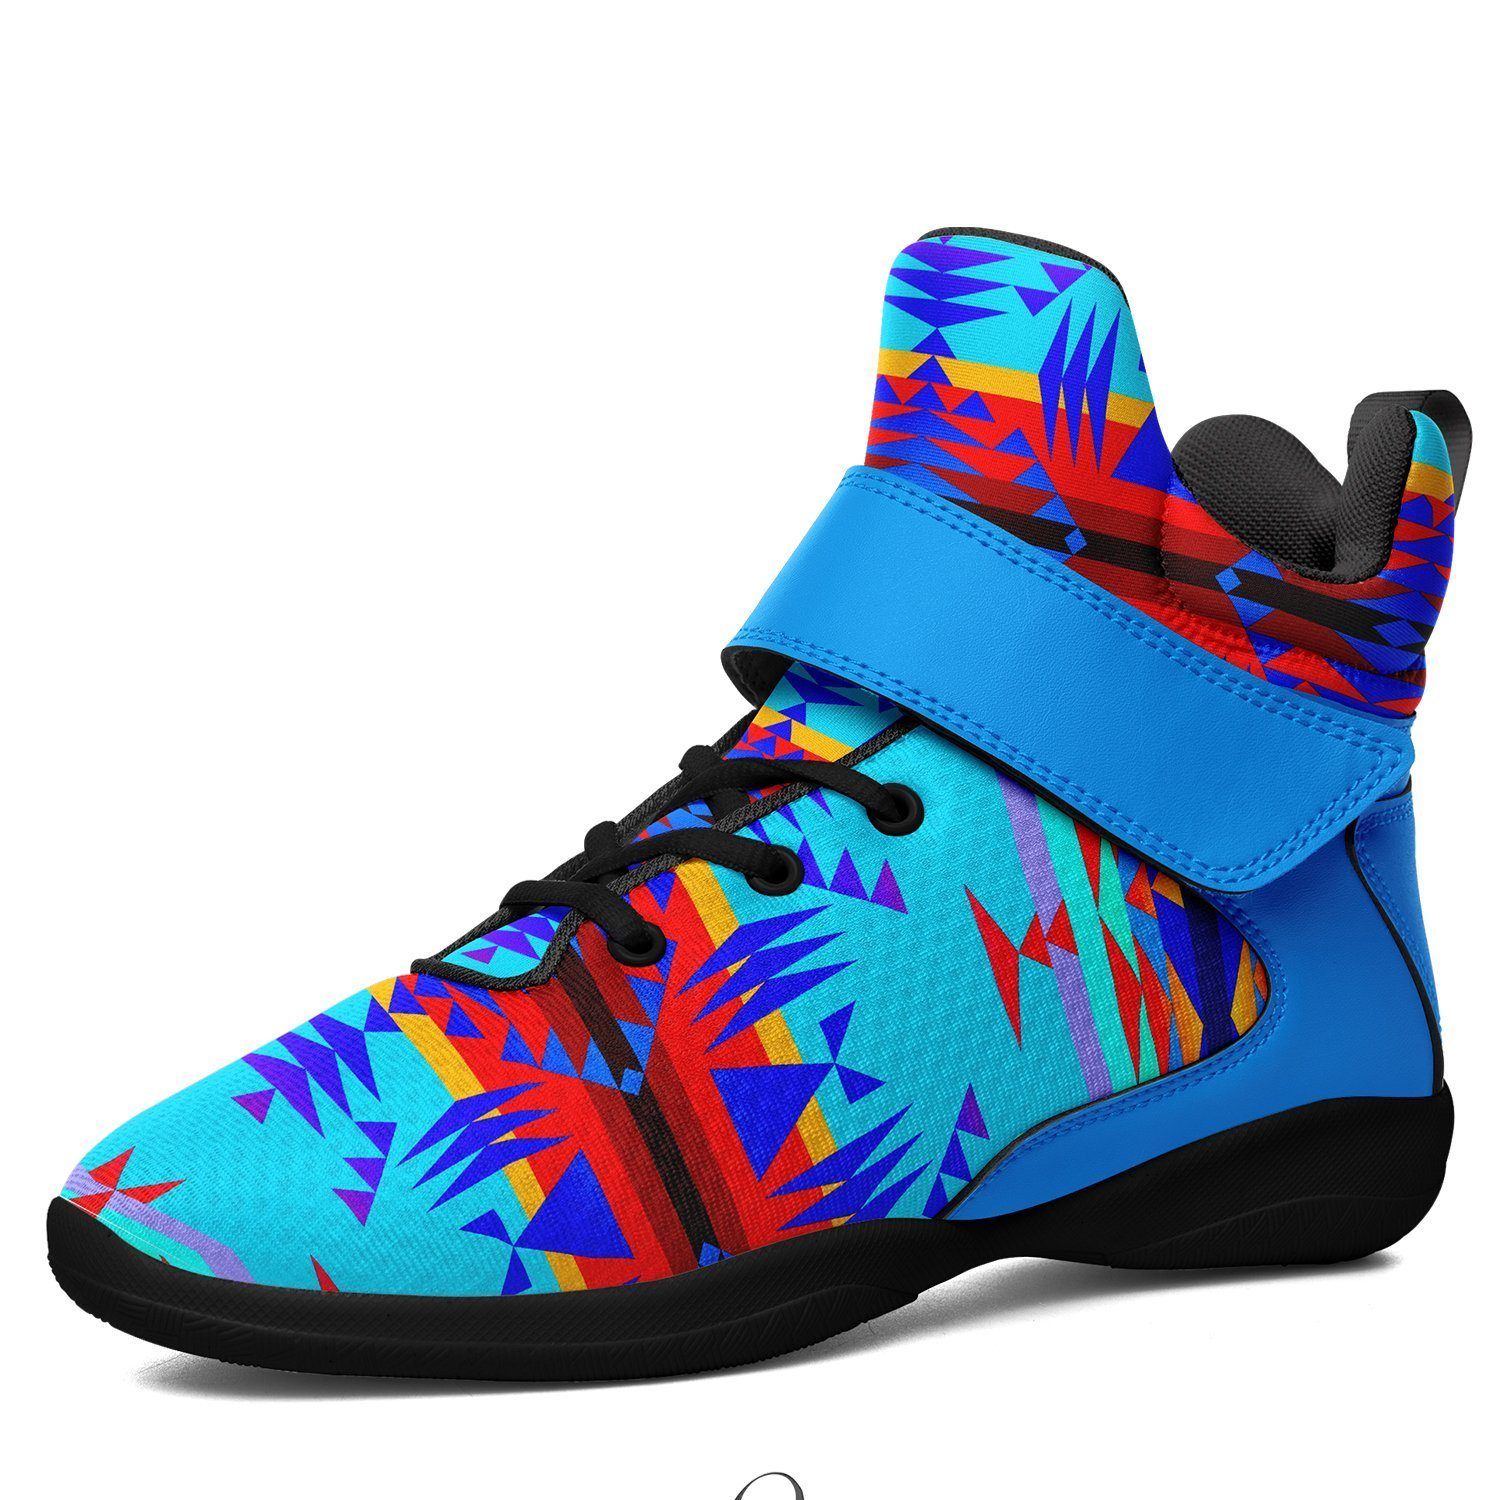 Between the Mountains Blue Ipottaa Basketball / Sport High Top Shoes - Black Sole 49 Dzine US Men 7 / EUR 40 Black Sole with Light Blue Strap 